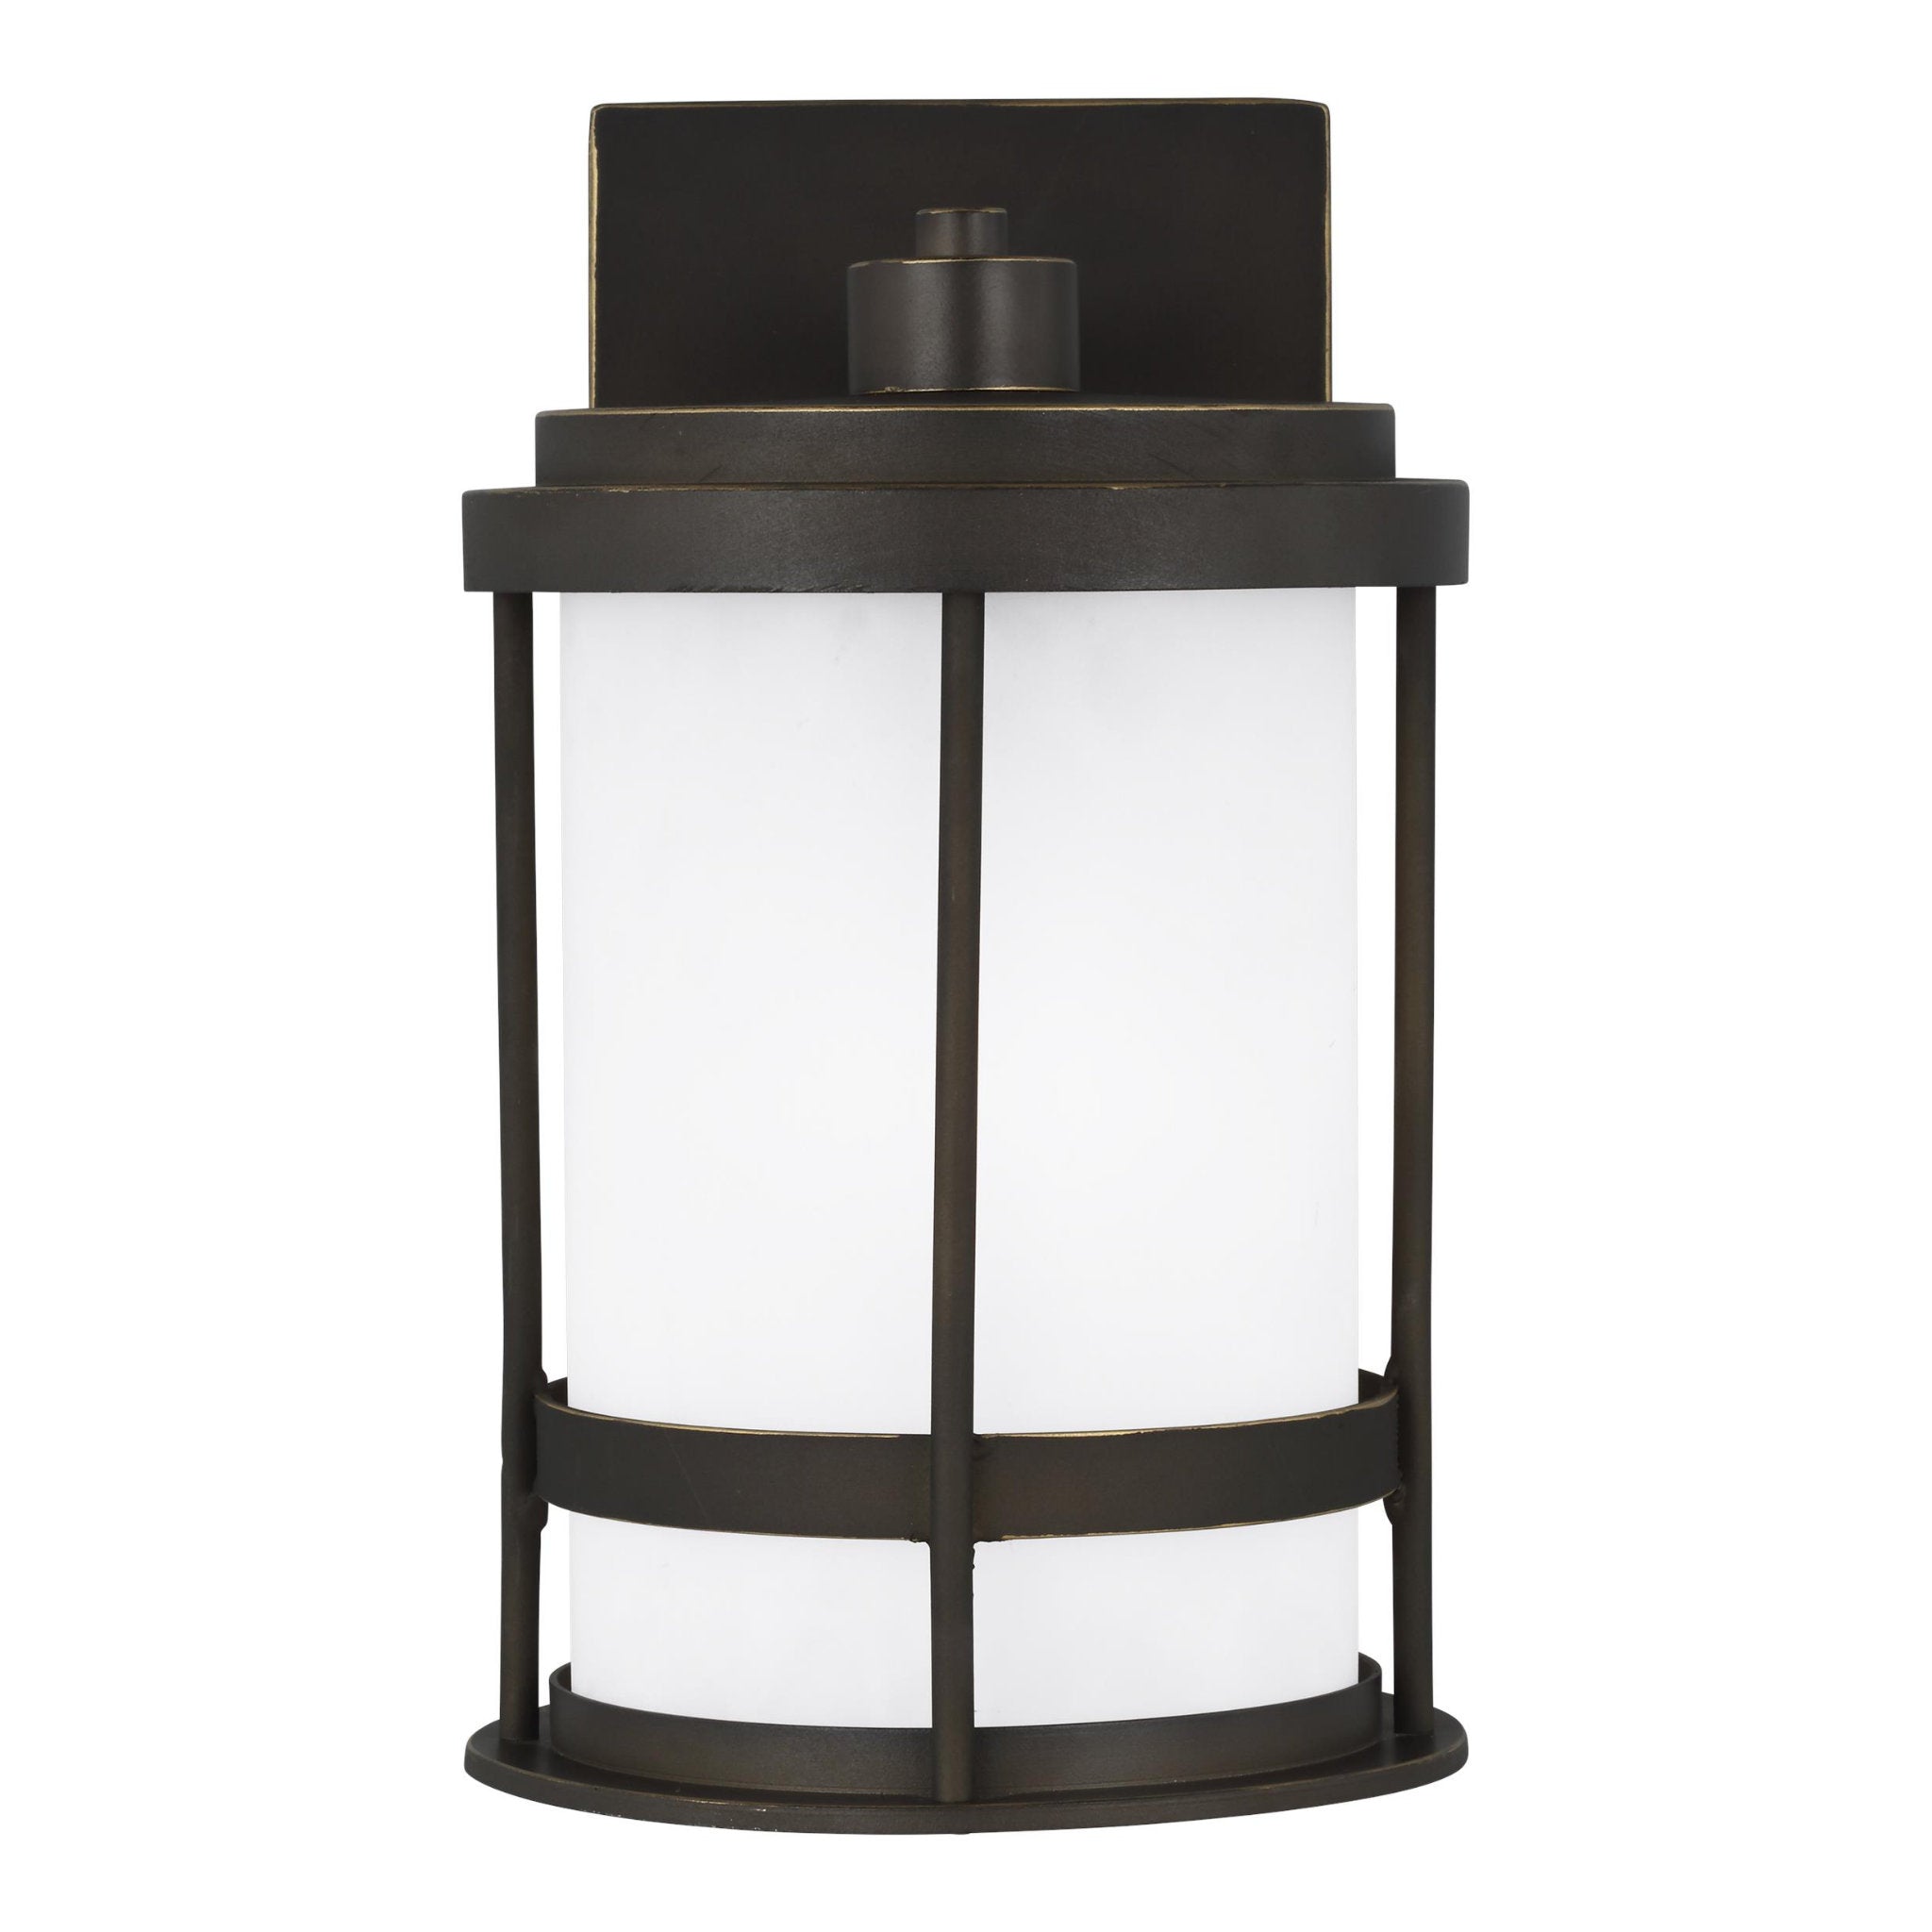 Wilburn Small One Light Outdoor Wall Lantern LED Transitional Fixture Dark Sky 6" Width 10.25" Height Aluminum Round Satin Etched Shade in Antique Bronze